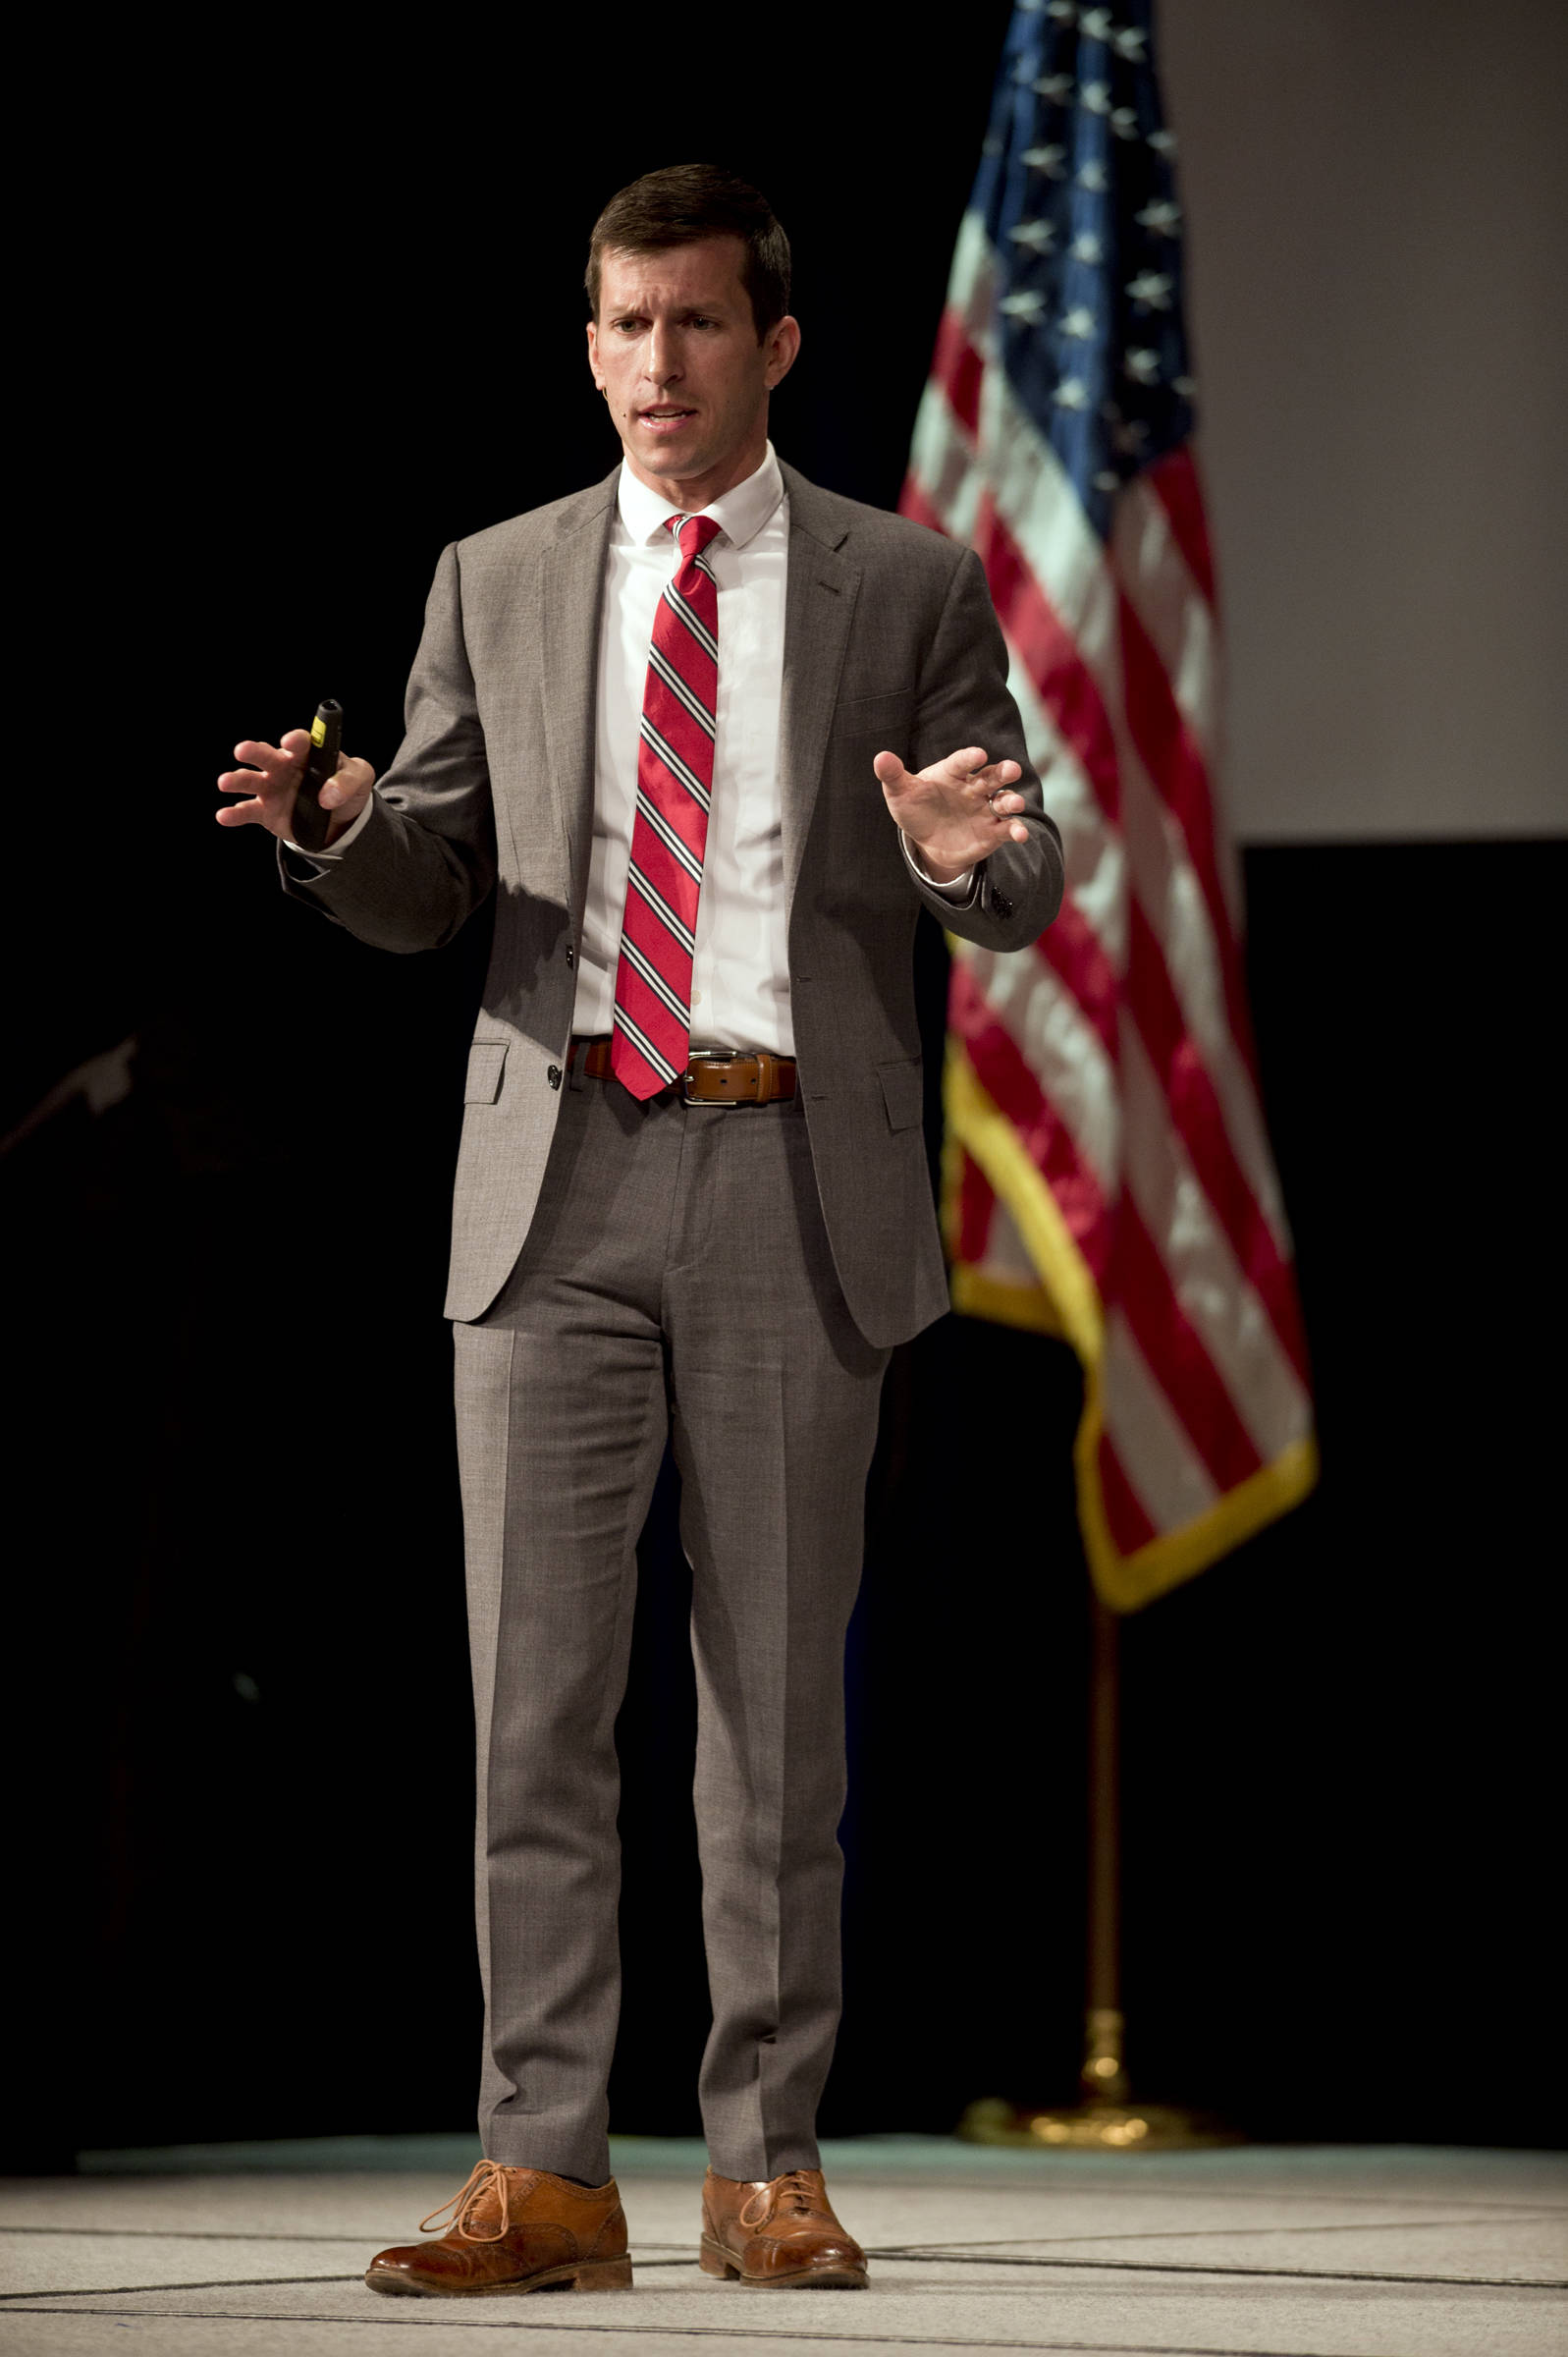 Former Navy SEAL Lt. Brandon Stone speaks at the Pillars of America at Centennial Hall on Wednesday, April 19, 2017. Stone, who grew up in Juneau, is the first of three speakers in the annual speaker series hosted by the Juneau Glacier Valley Rotary Club. W. Mitchell speaks on April 26 and Larry Csonka on April 3. (Michael Penn | Juneau Empire)